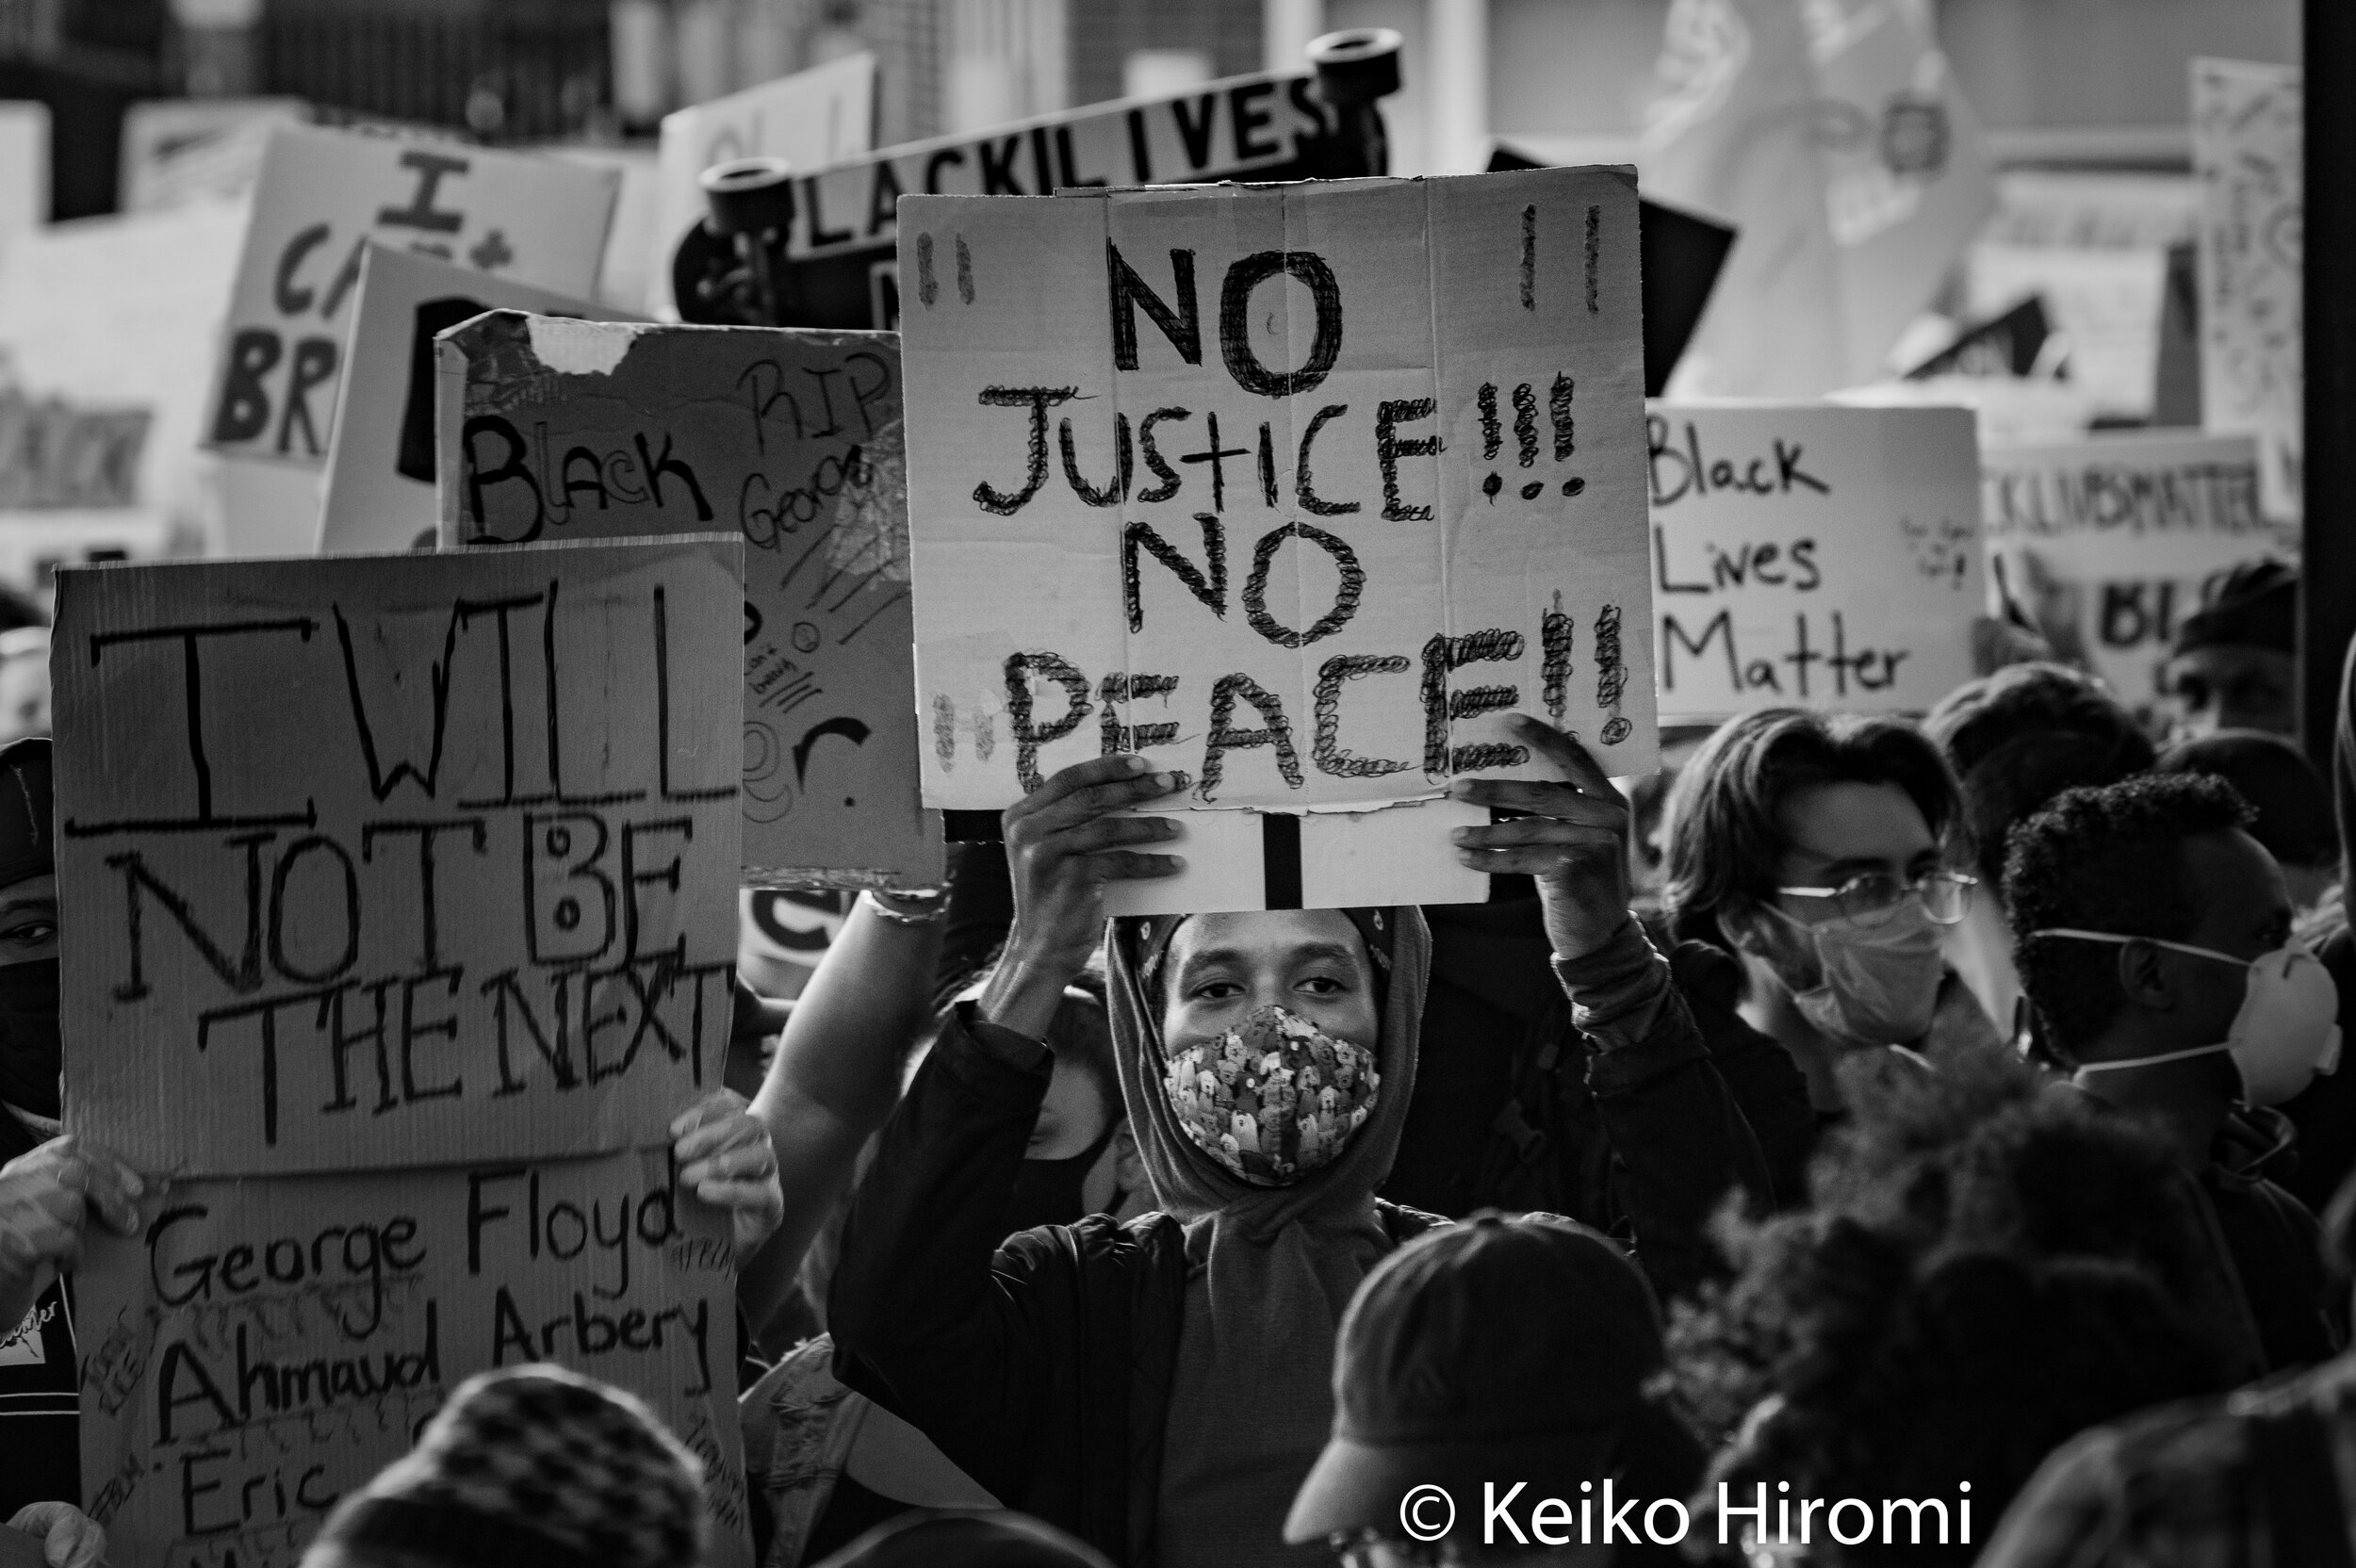  May 31, 2020, Boston, Massachusetts, USA: A protester holds a sign "No justice, no peace" during a rally in response to deaths of George Floyd and against police brutality and racism in Boston. 